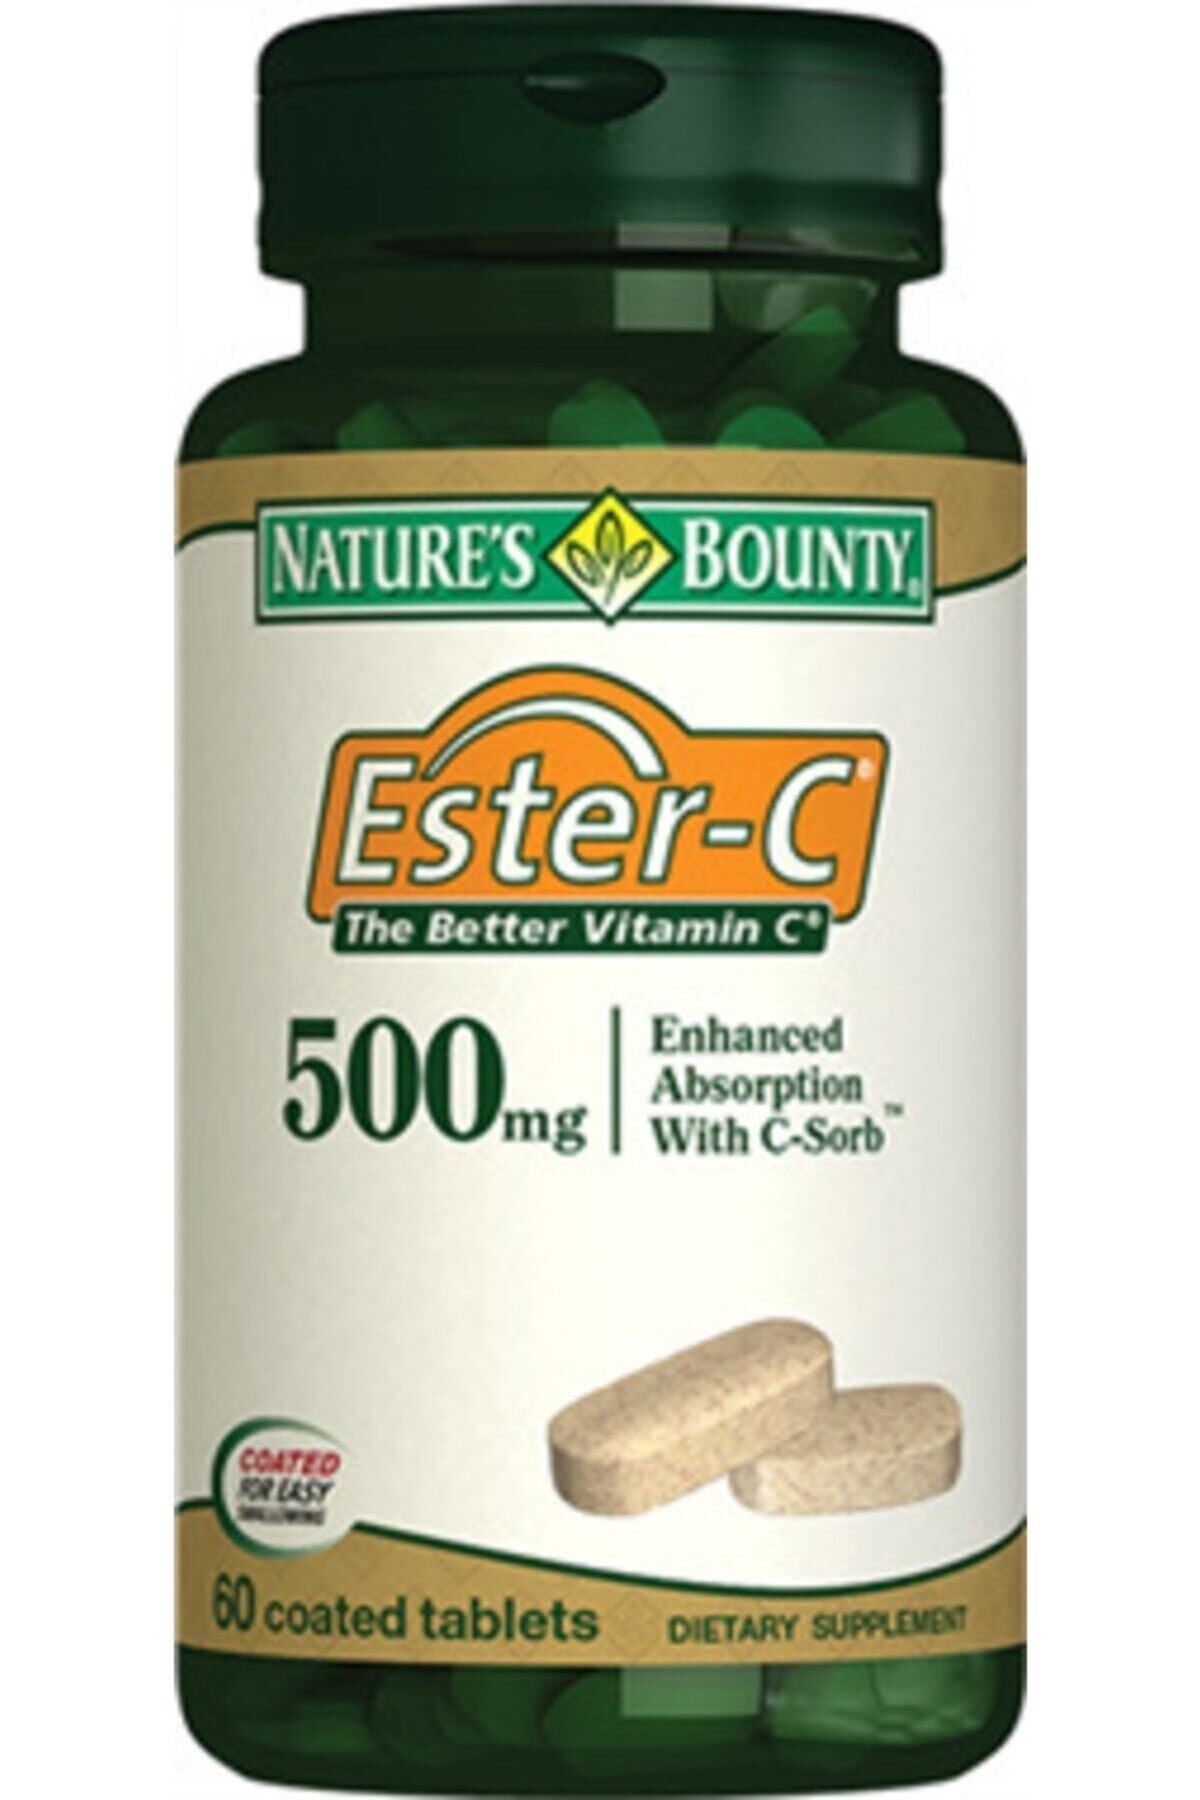 Natures Bounty Ester-c 500 mg 60 Tablet